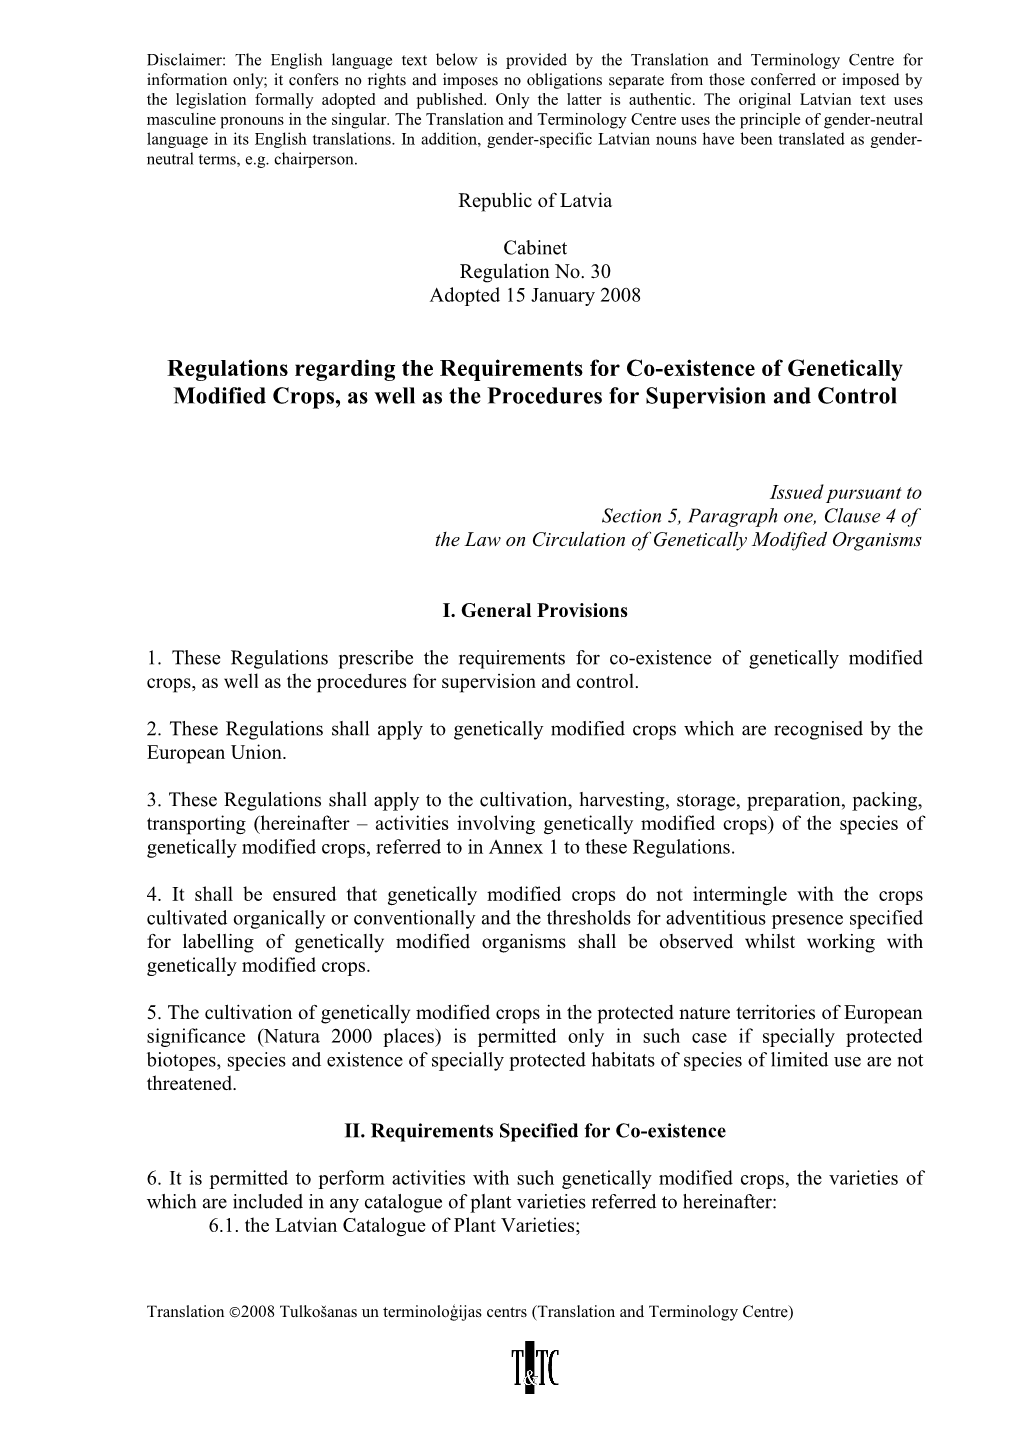 Regulations Regarding the Requirements for Co-Existence of Genetically Modified Crops